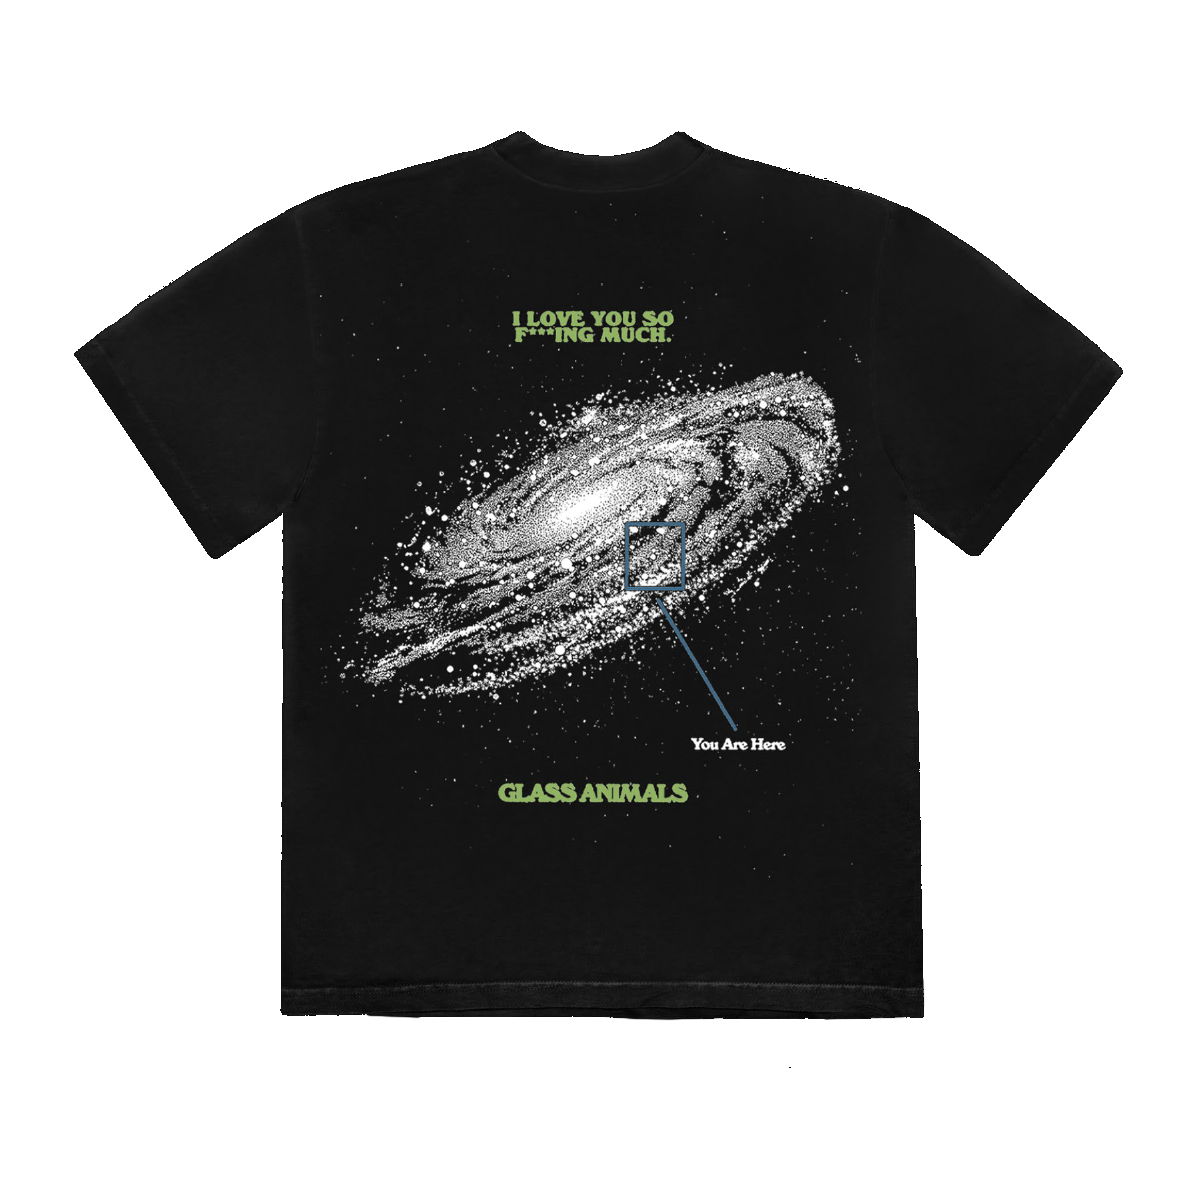 Glass Animals - You Are Here T-Shirt in Black